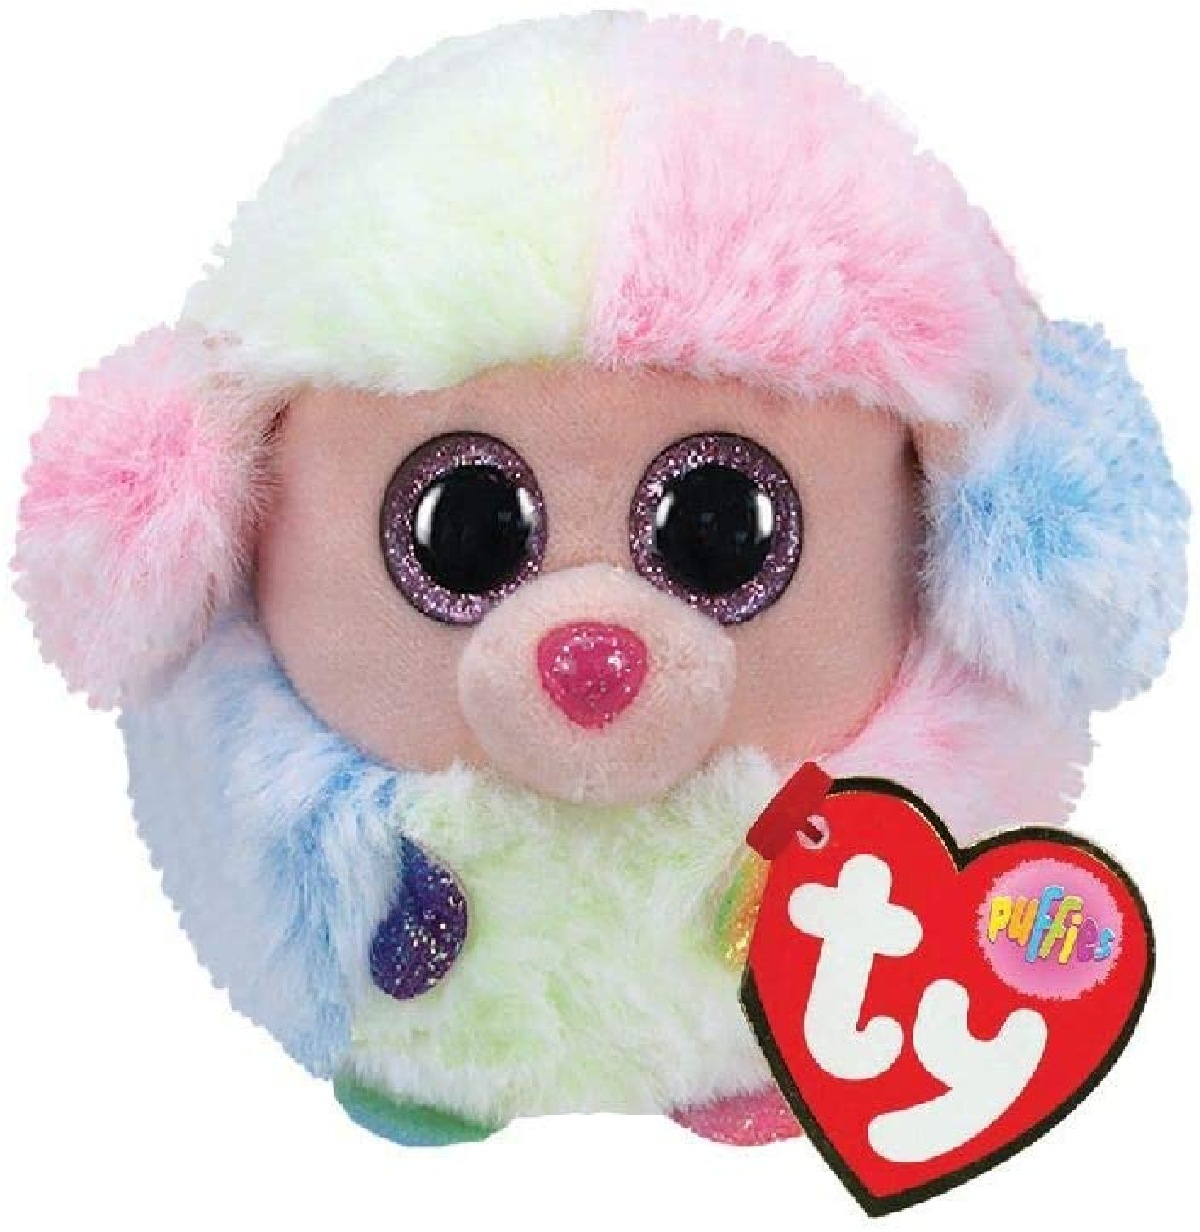 TY 42511 Rainbow Poodle Puffies Pudel Plüschtier, Mehrfarbig